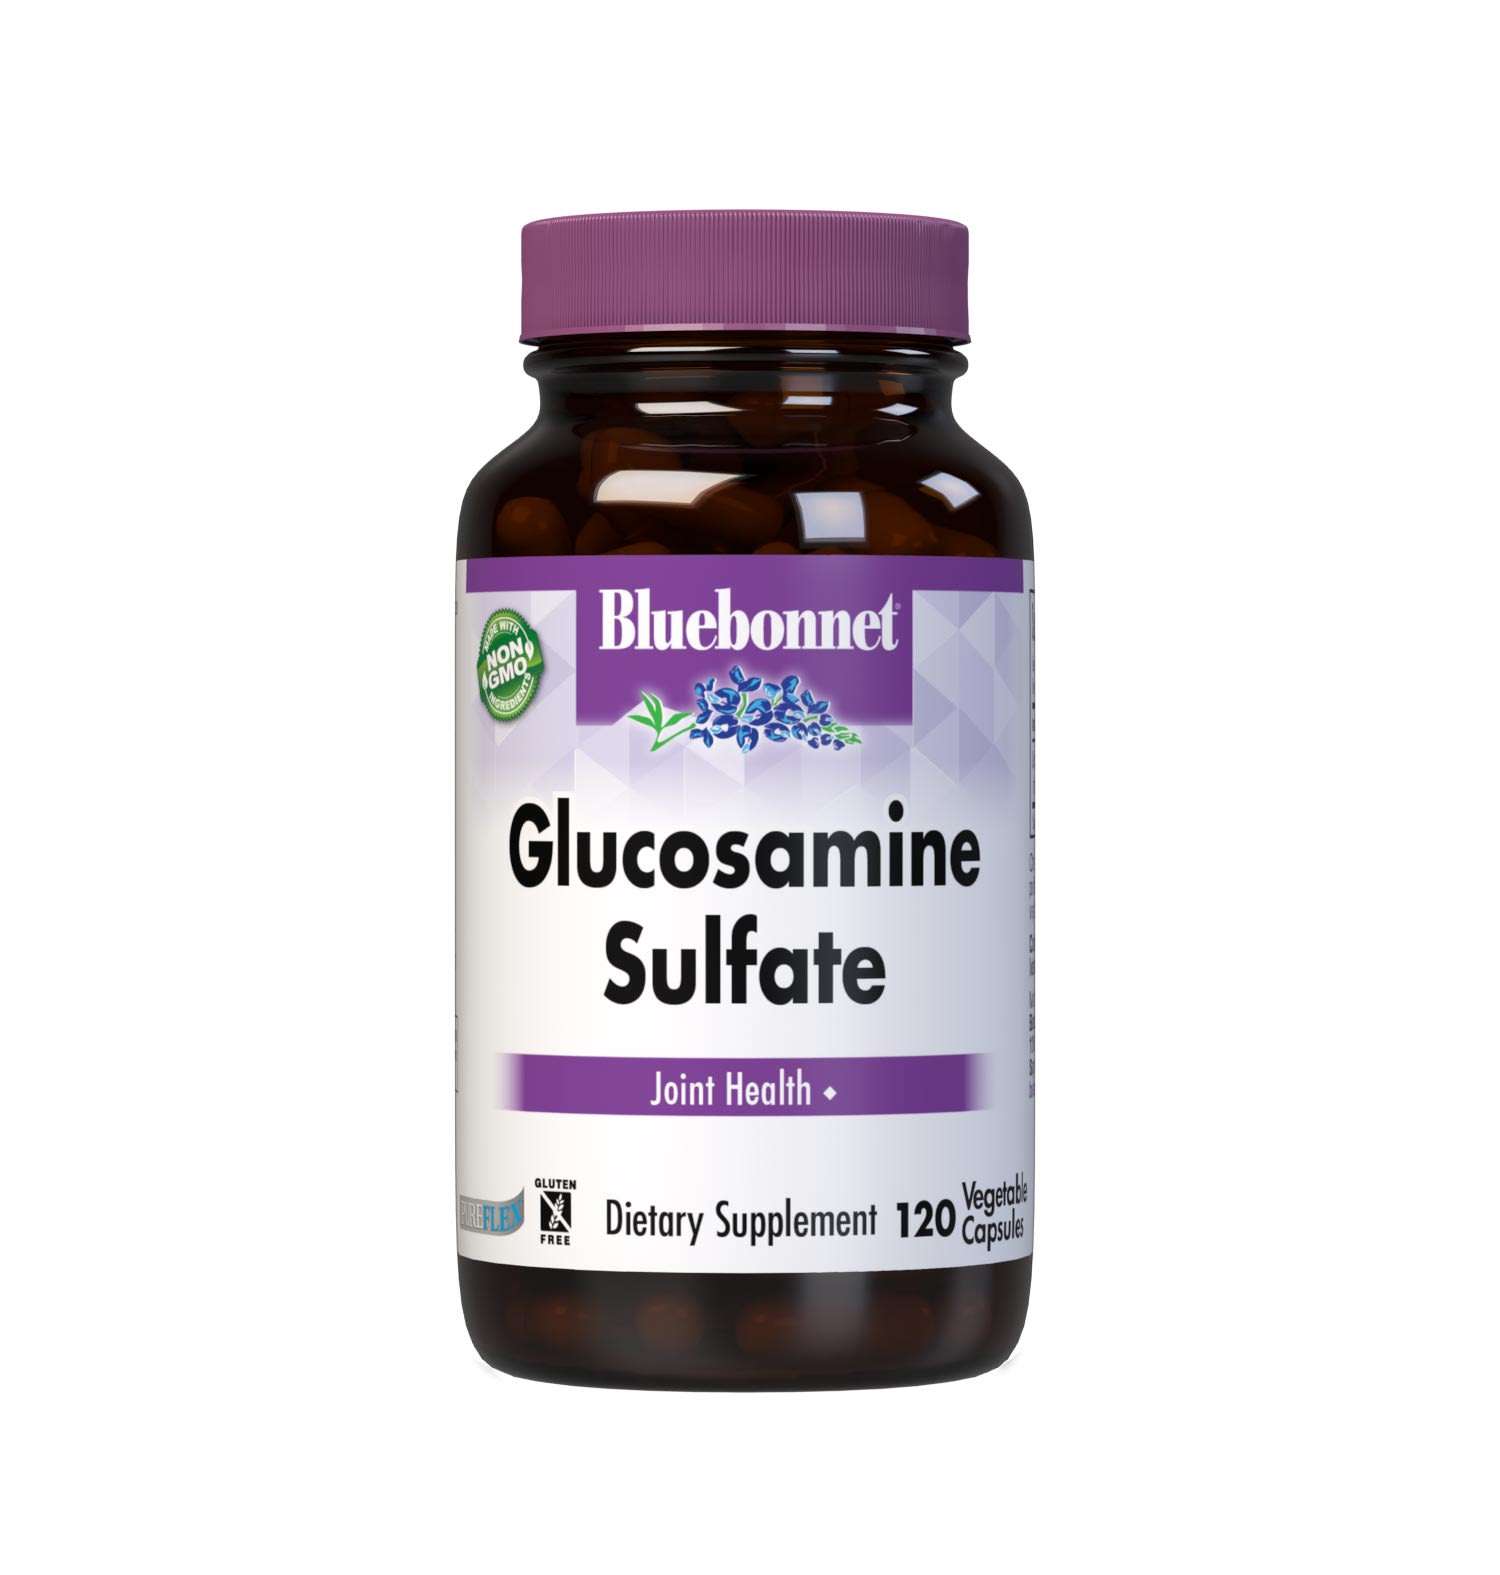 Bluebonnet’s Glucosamine Sulfate 500 mg 120 Vegetable Capsules are formulated with glucosamine sulfate derived from crustacean shellfish to help maintain healthy structure and function of cartilage in the joints for better joint mobility. #size_120 count